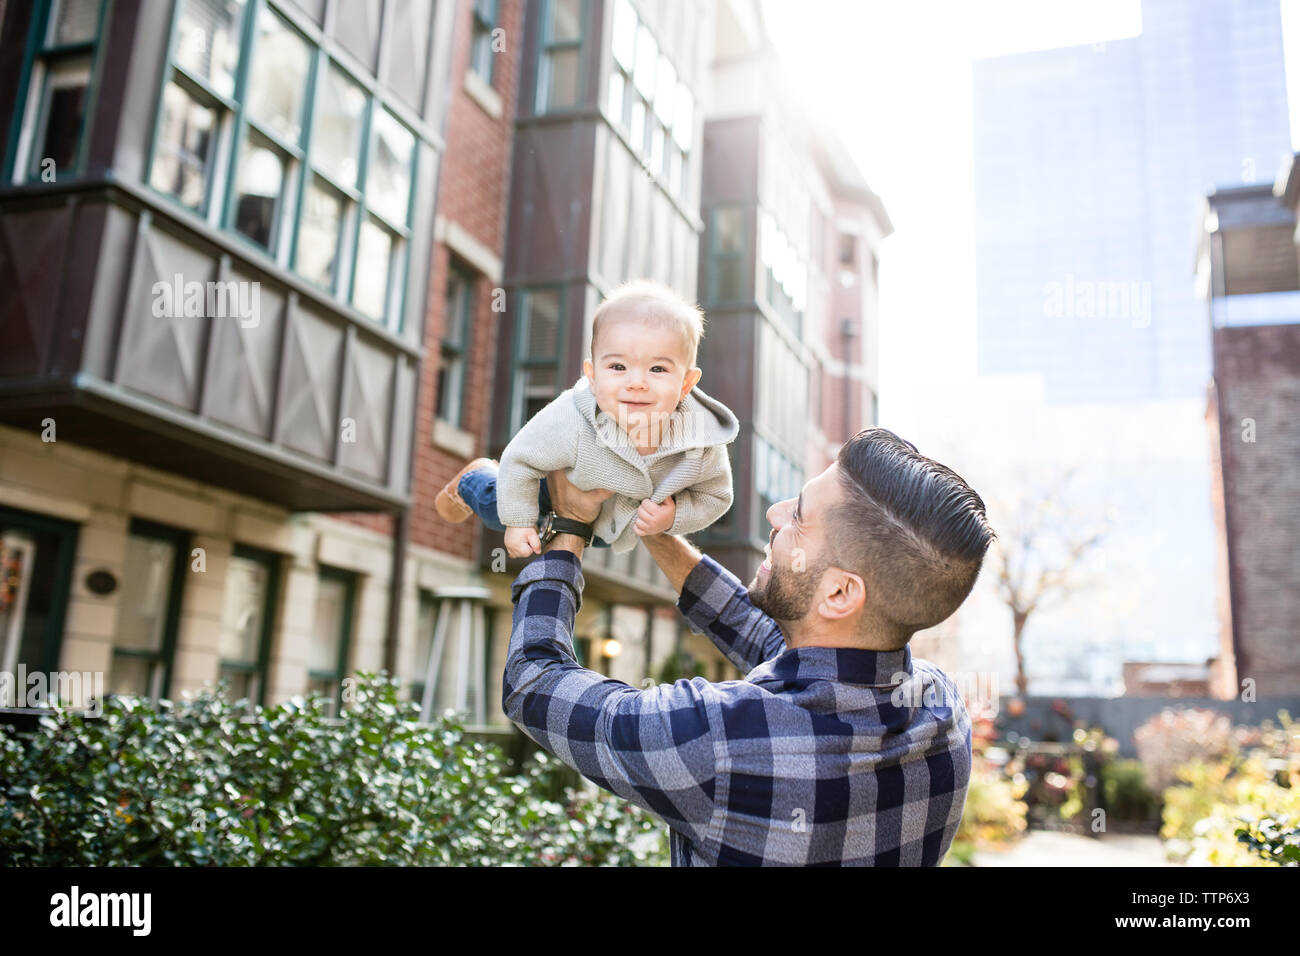 Smiling dad and baby outdoors in city holding baby up Stock Photo